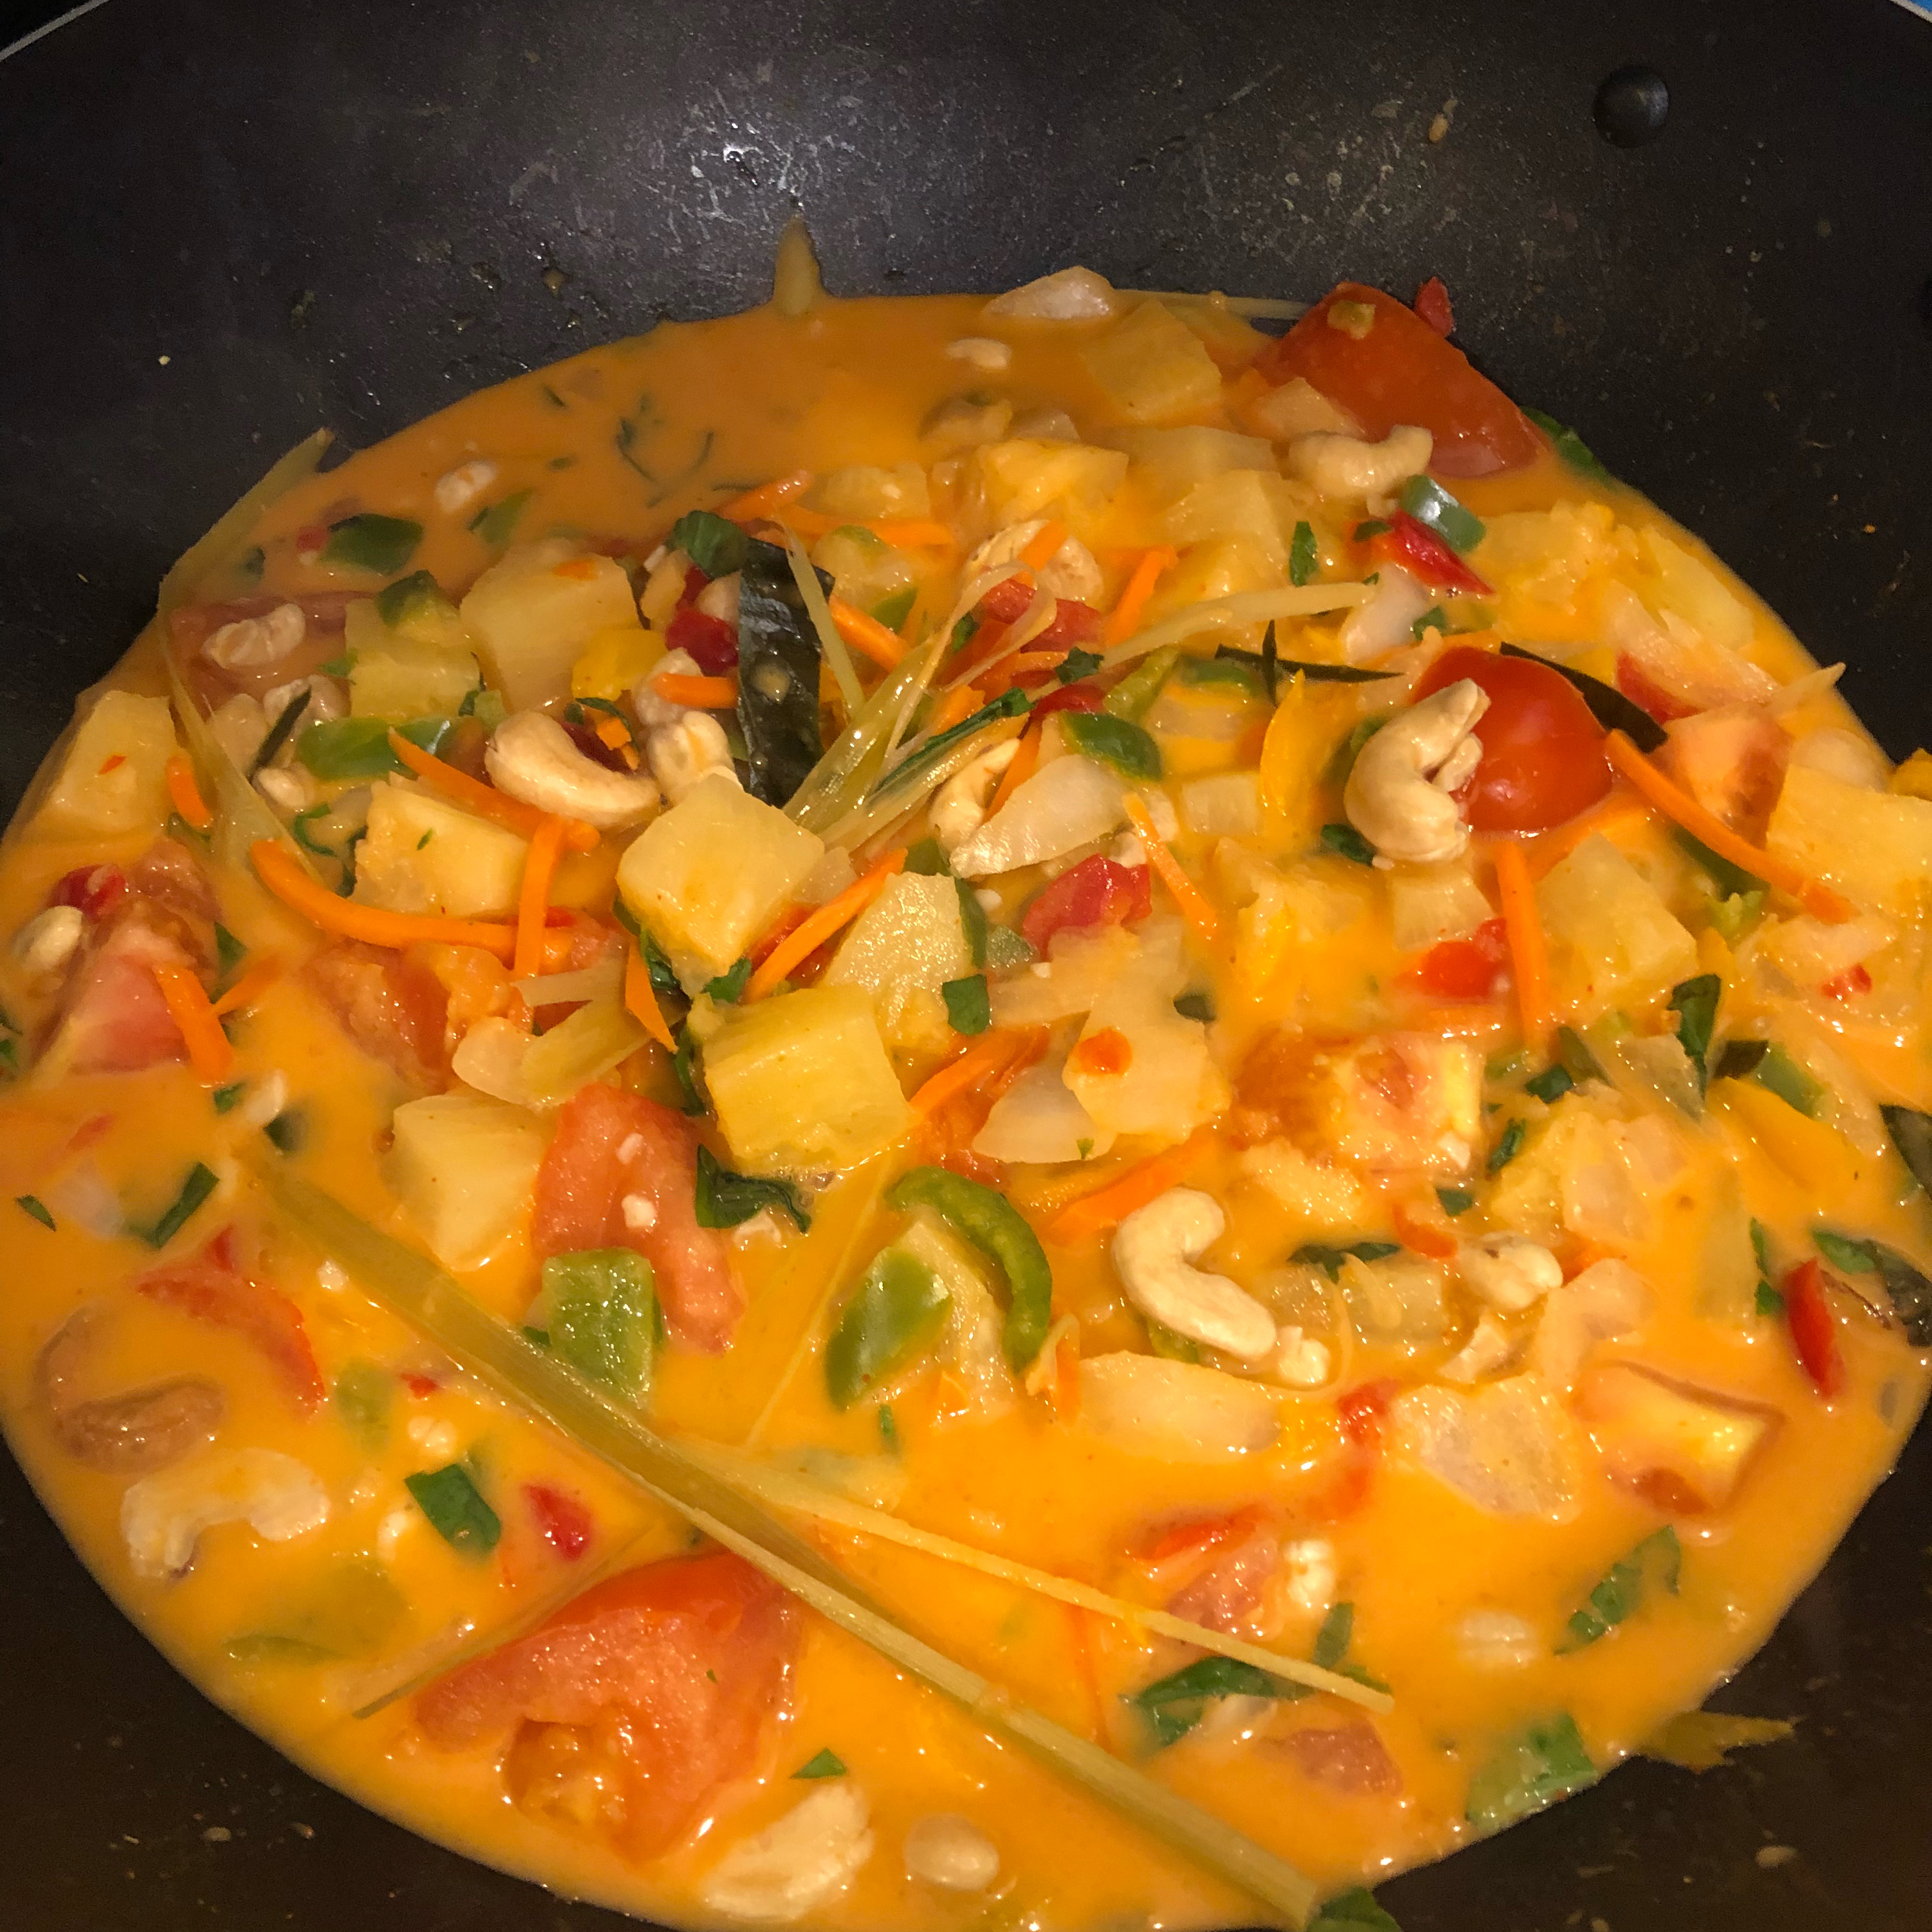 <p>"This is the quickest and easiest shrimp red Thai curry recipe ever," says MITCHNSTEVE. "Great for an impressive dinner party, because it tastes great but hardly takes any time at all (especially if you buy your prawns already peeled). Serve with hot jasmine rice." It's ready in about 40 minutes.</p>
                          <p> </p>
                          